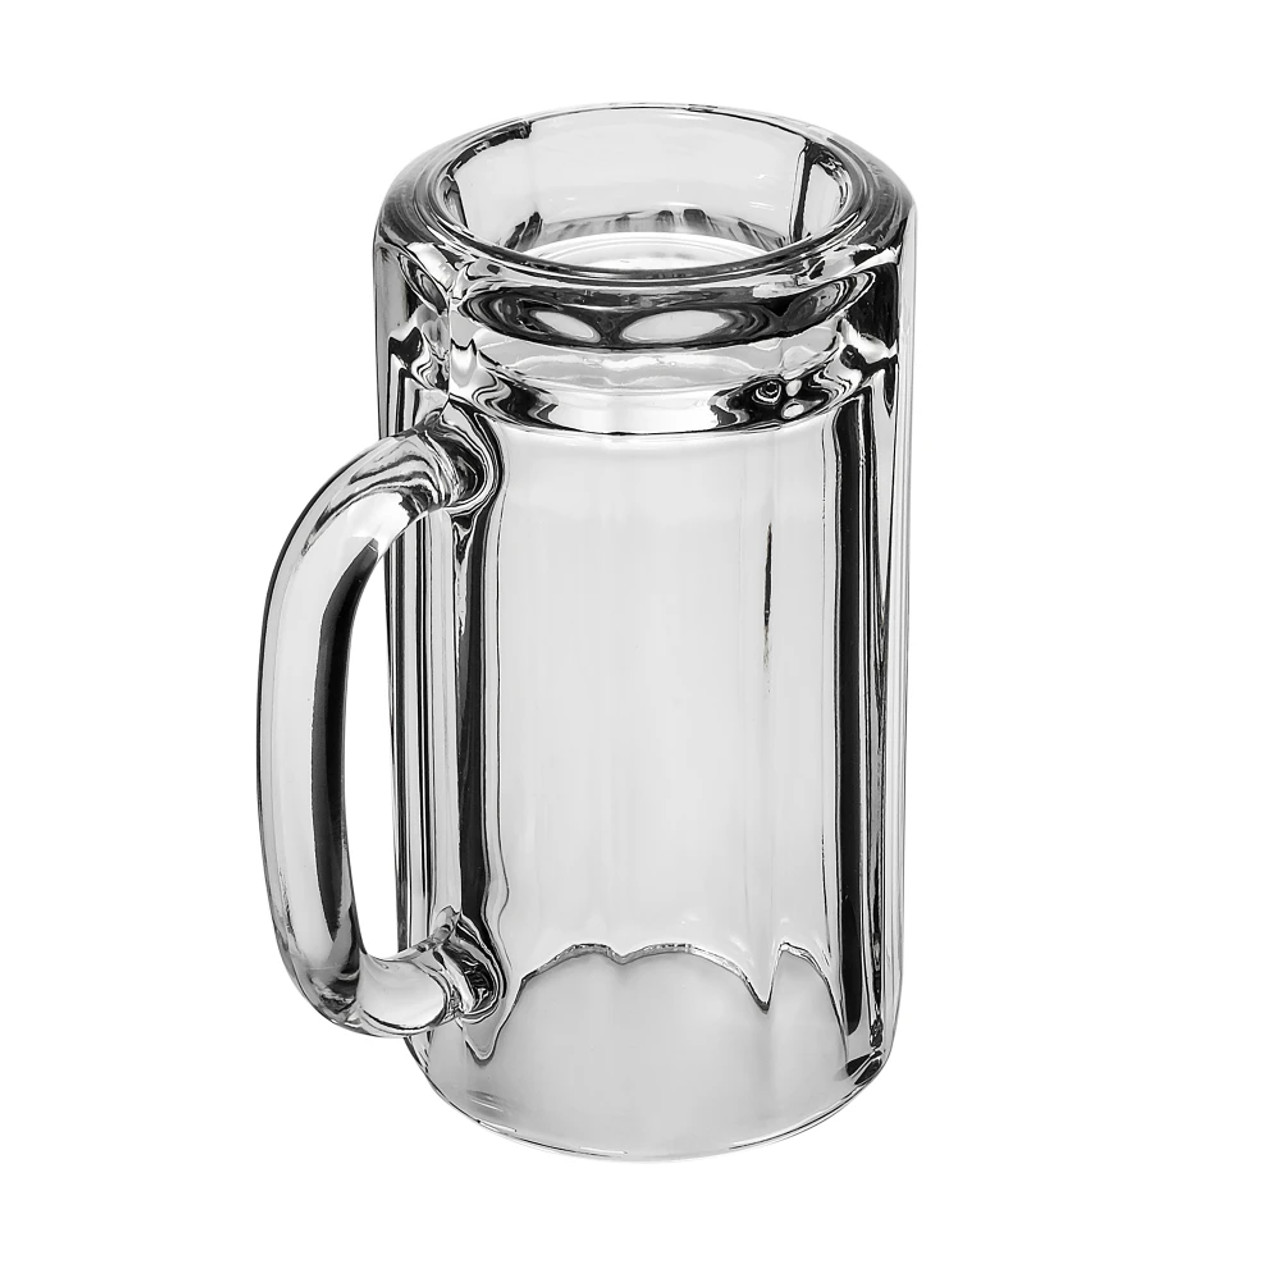 Libbey 5020 16 oz Paneled Glass Mug, Mugs and Tankards Series, 12/Case - Chicken Pieces